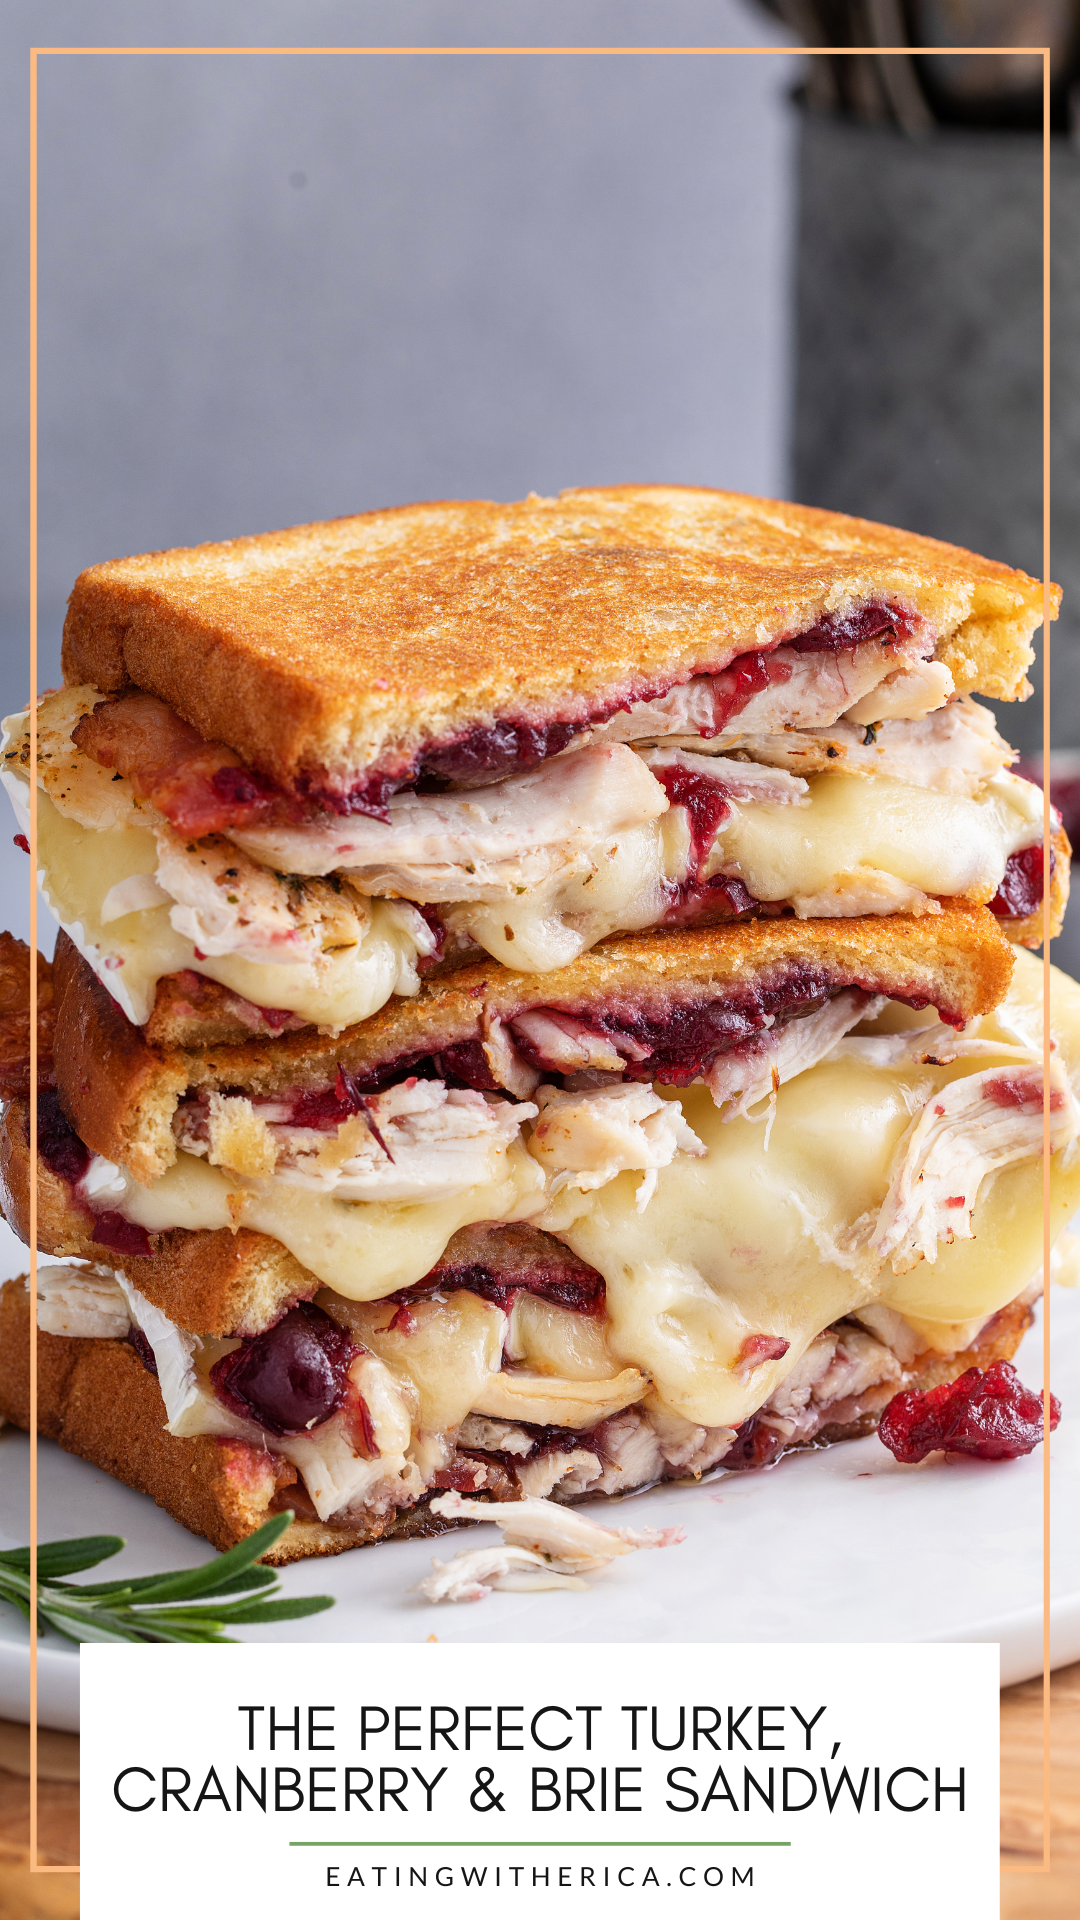 Looking for the perfect holiday sandwich? CLICK HERE to make the perfect Turkey, Cranberry & Brie Sandwich! 